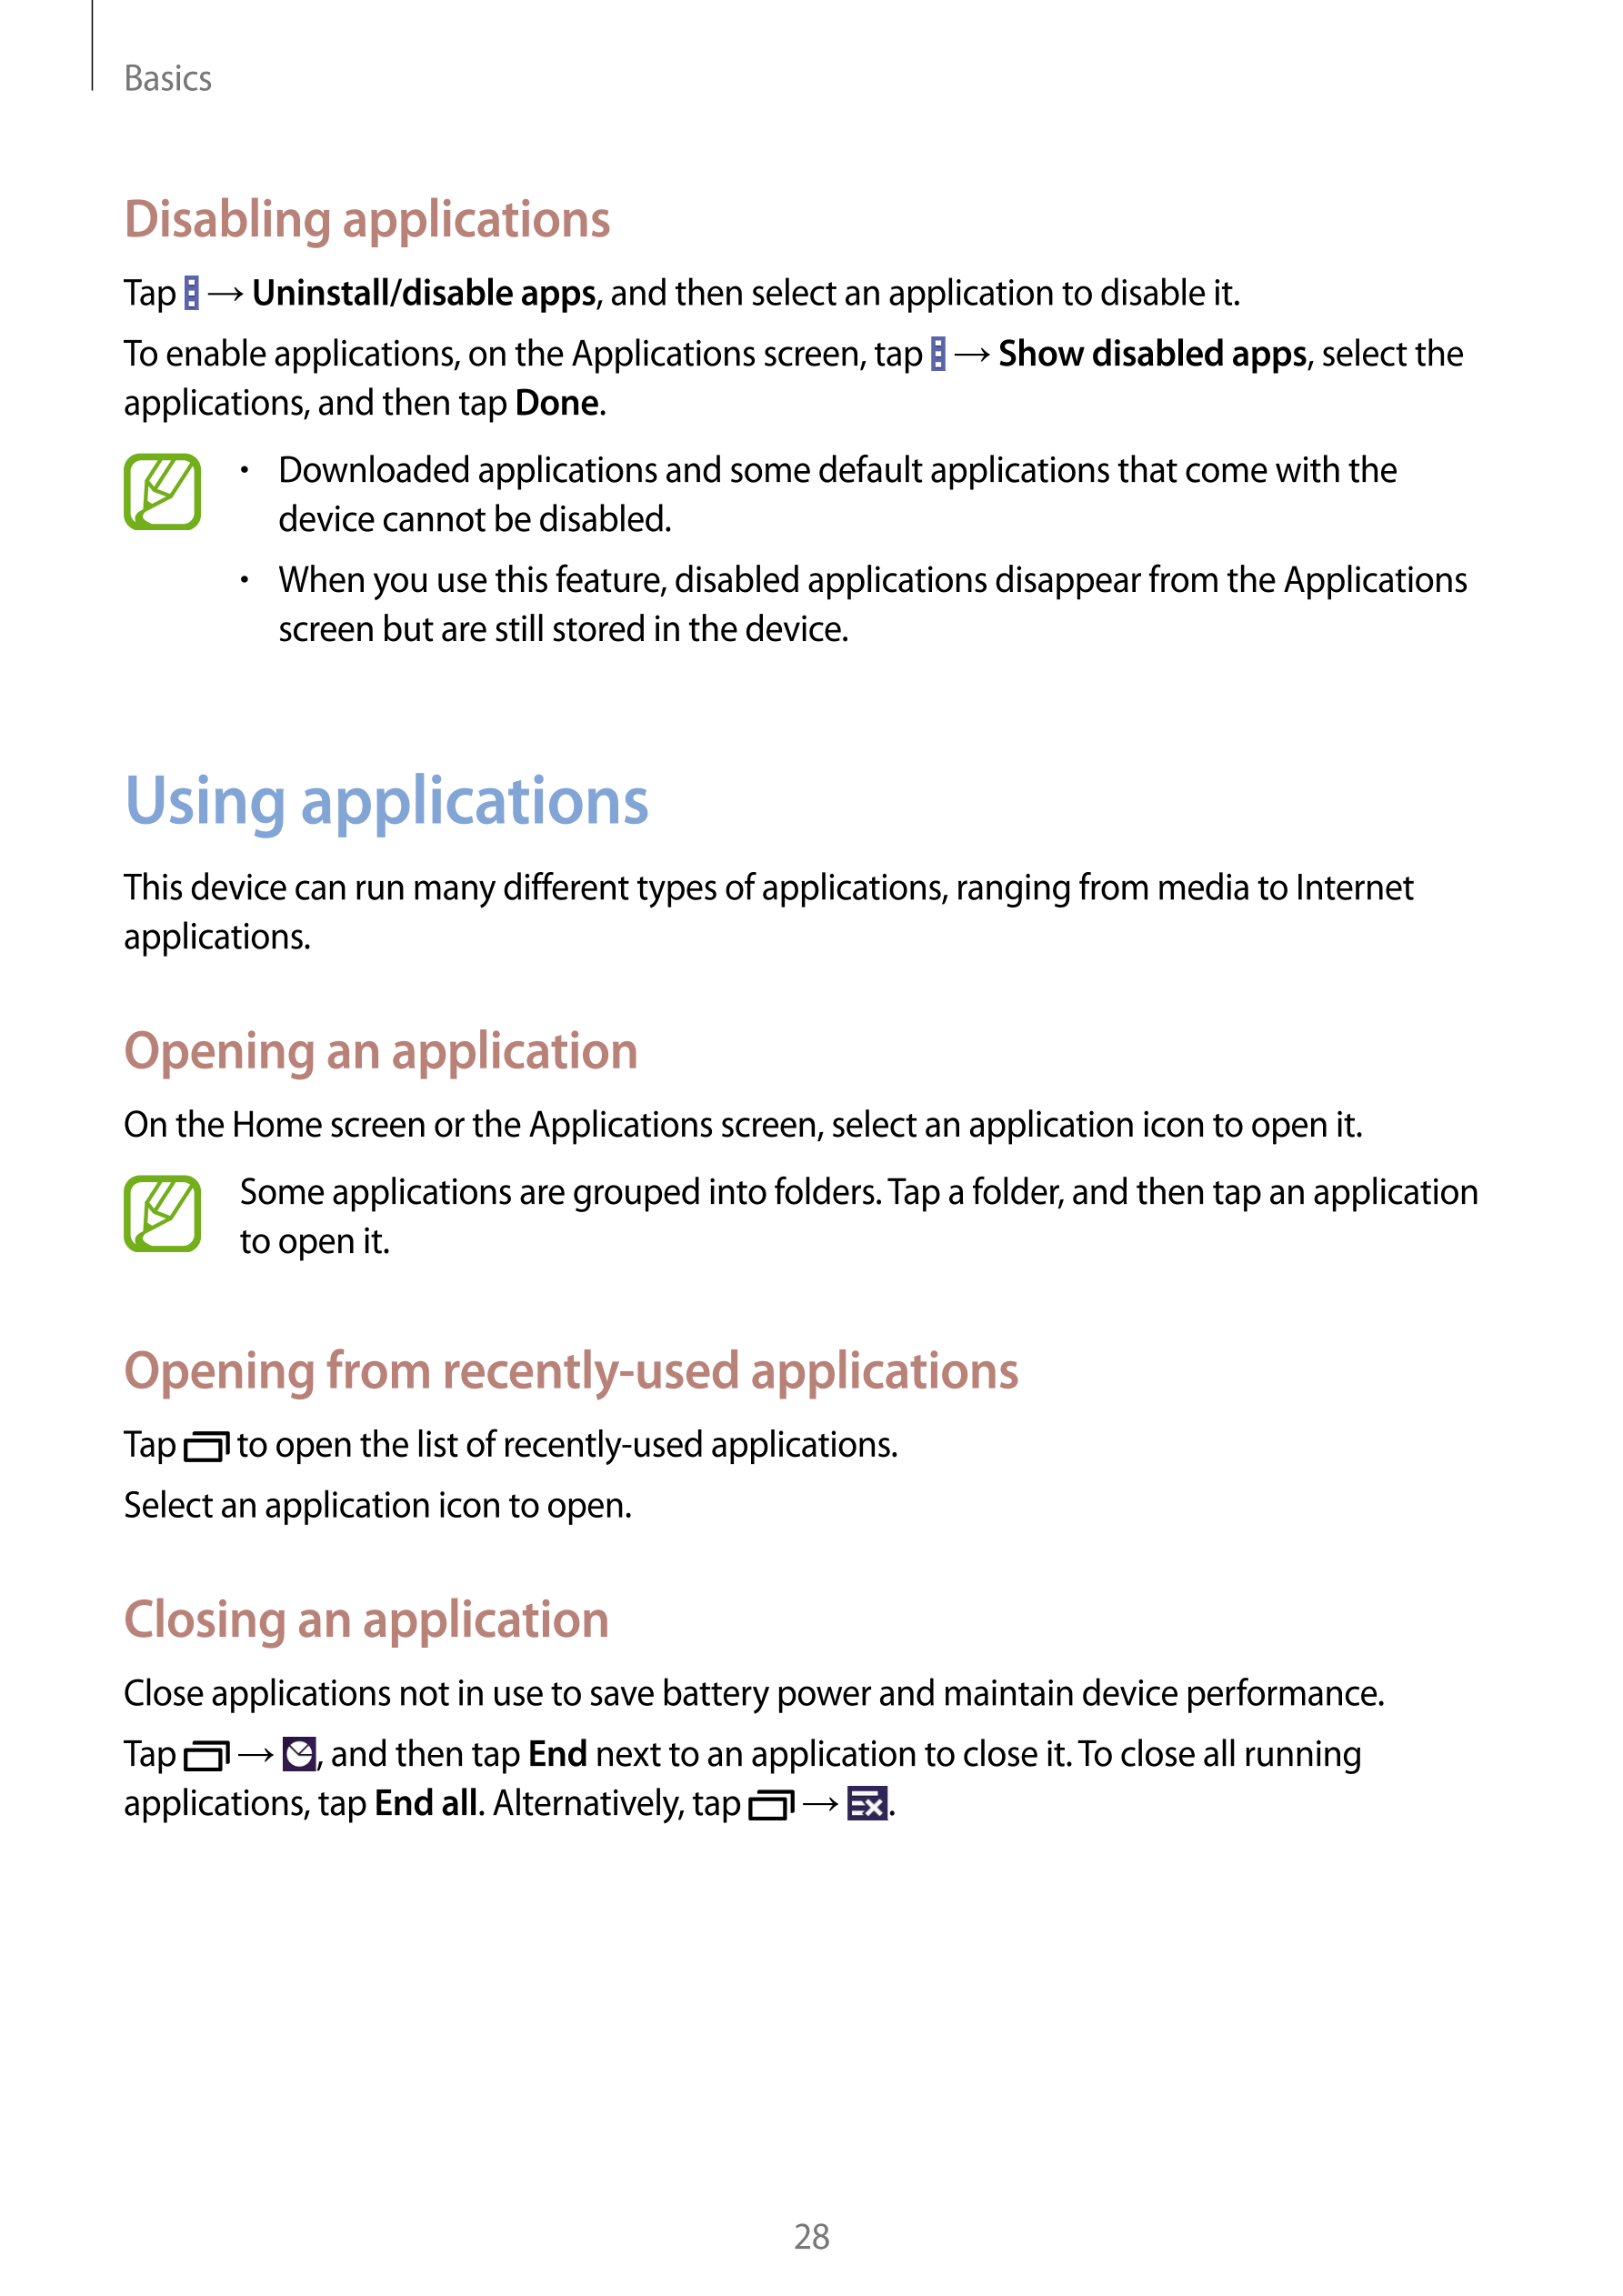 Basics
Disabling applications
Tap    →  Uninstall/disable apps, and then select an application to disable it.
To enable applicat